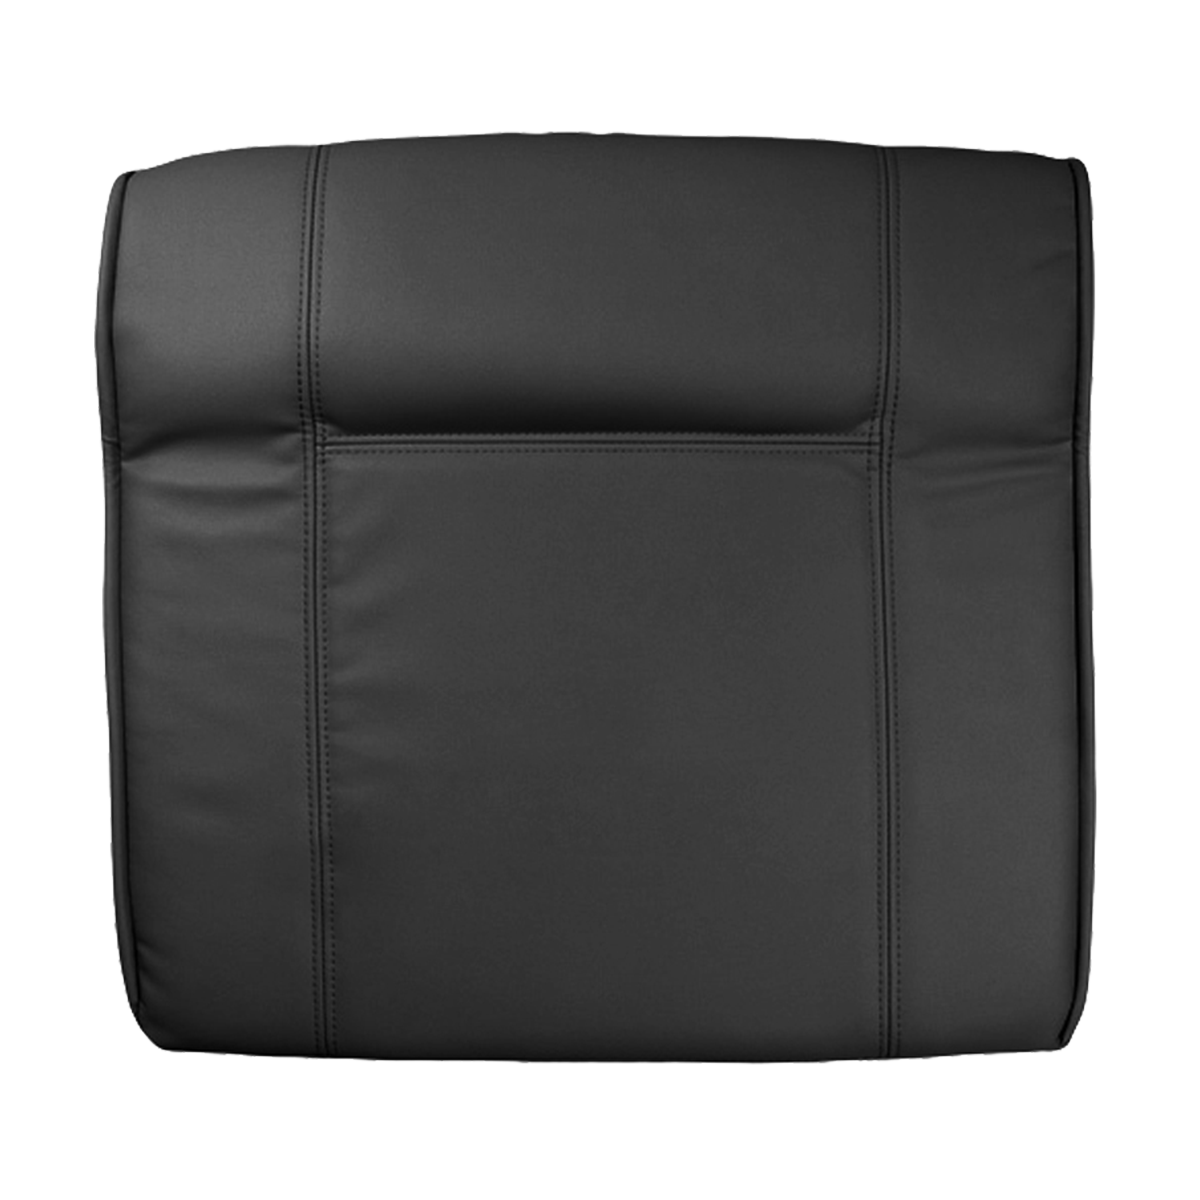 Whale Spa Black Caresst PU Leather Seat Cushion | Replacement Pedicure Chair Parts